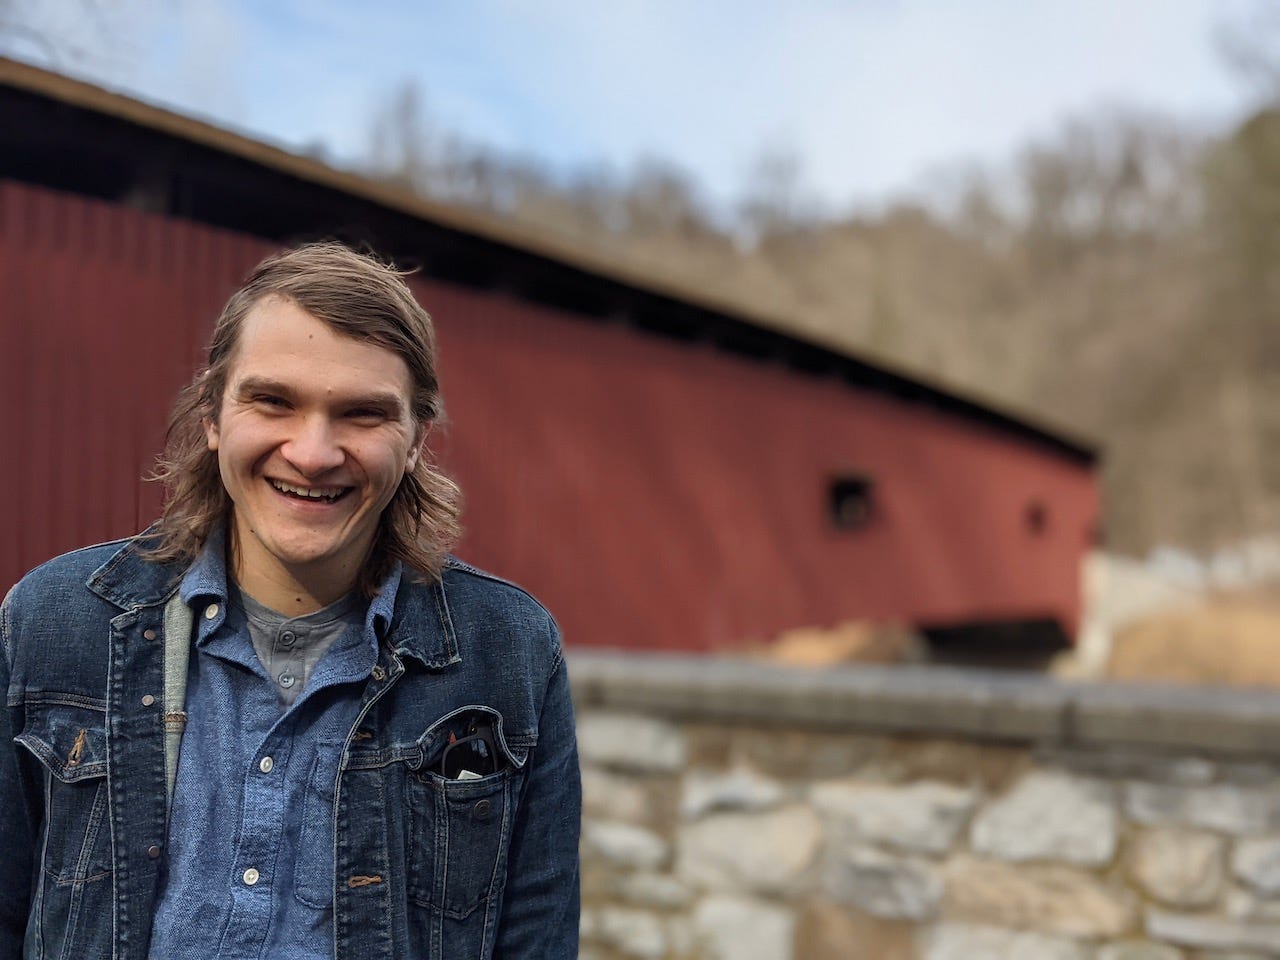 brett standing in front of a covered bridge